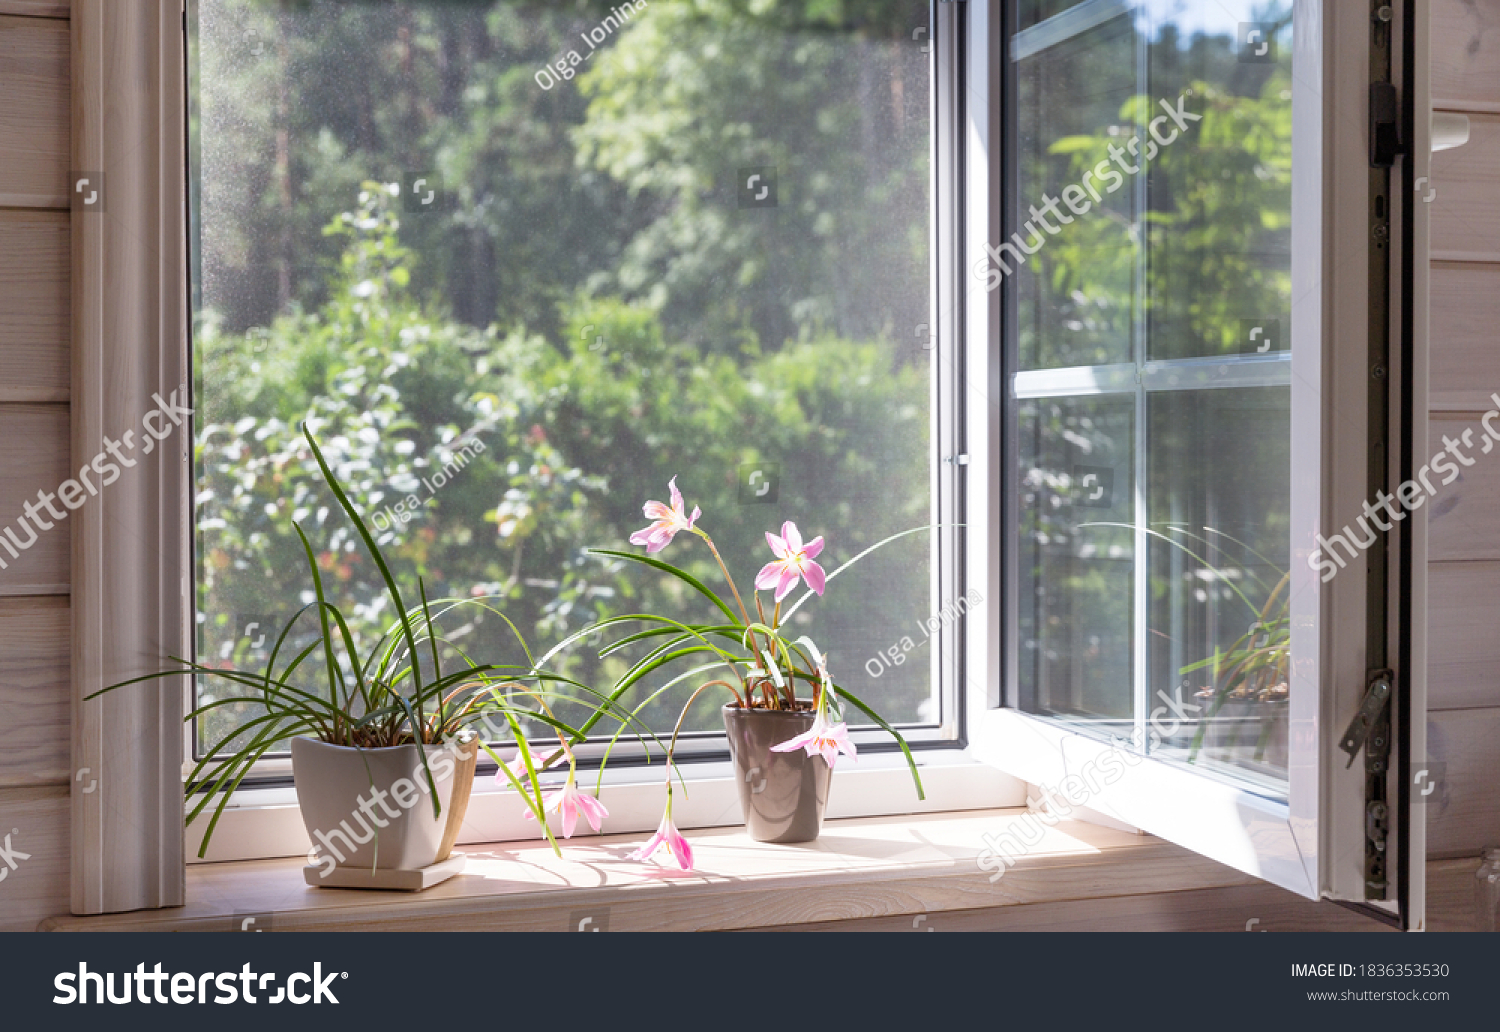 White window with mosquito net in a rustic wooden house overlooking the garden. Houseplants and a watering can on the windowsill. #1836353530